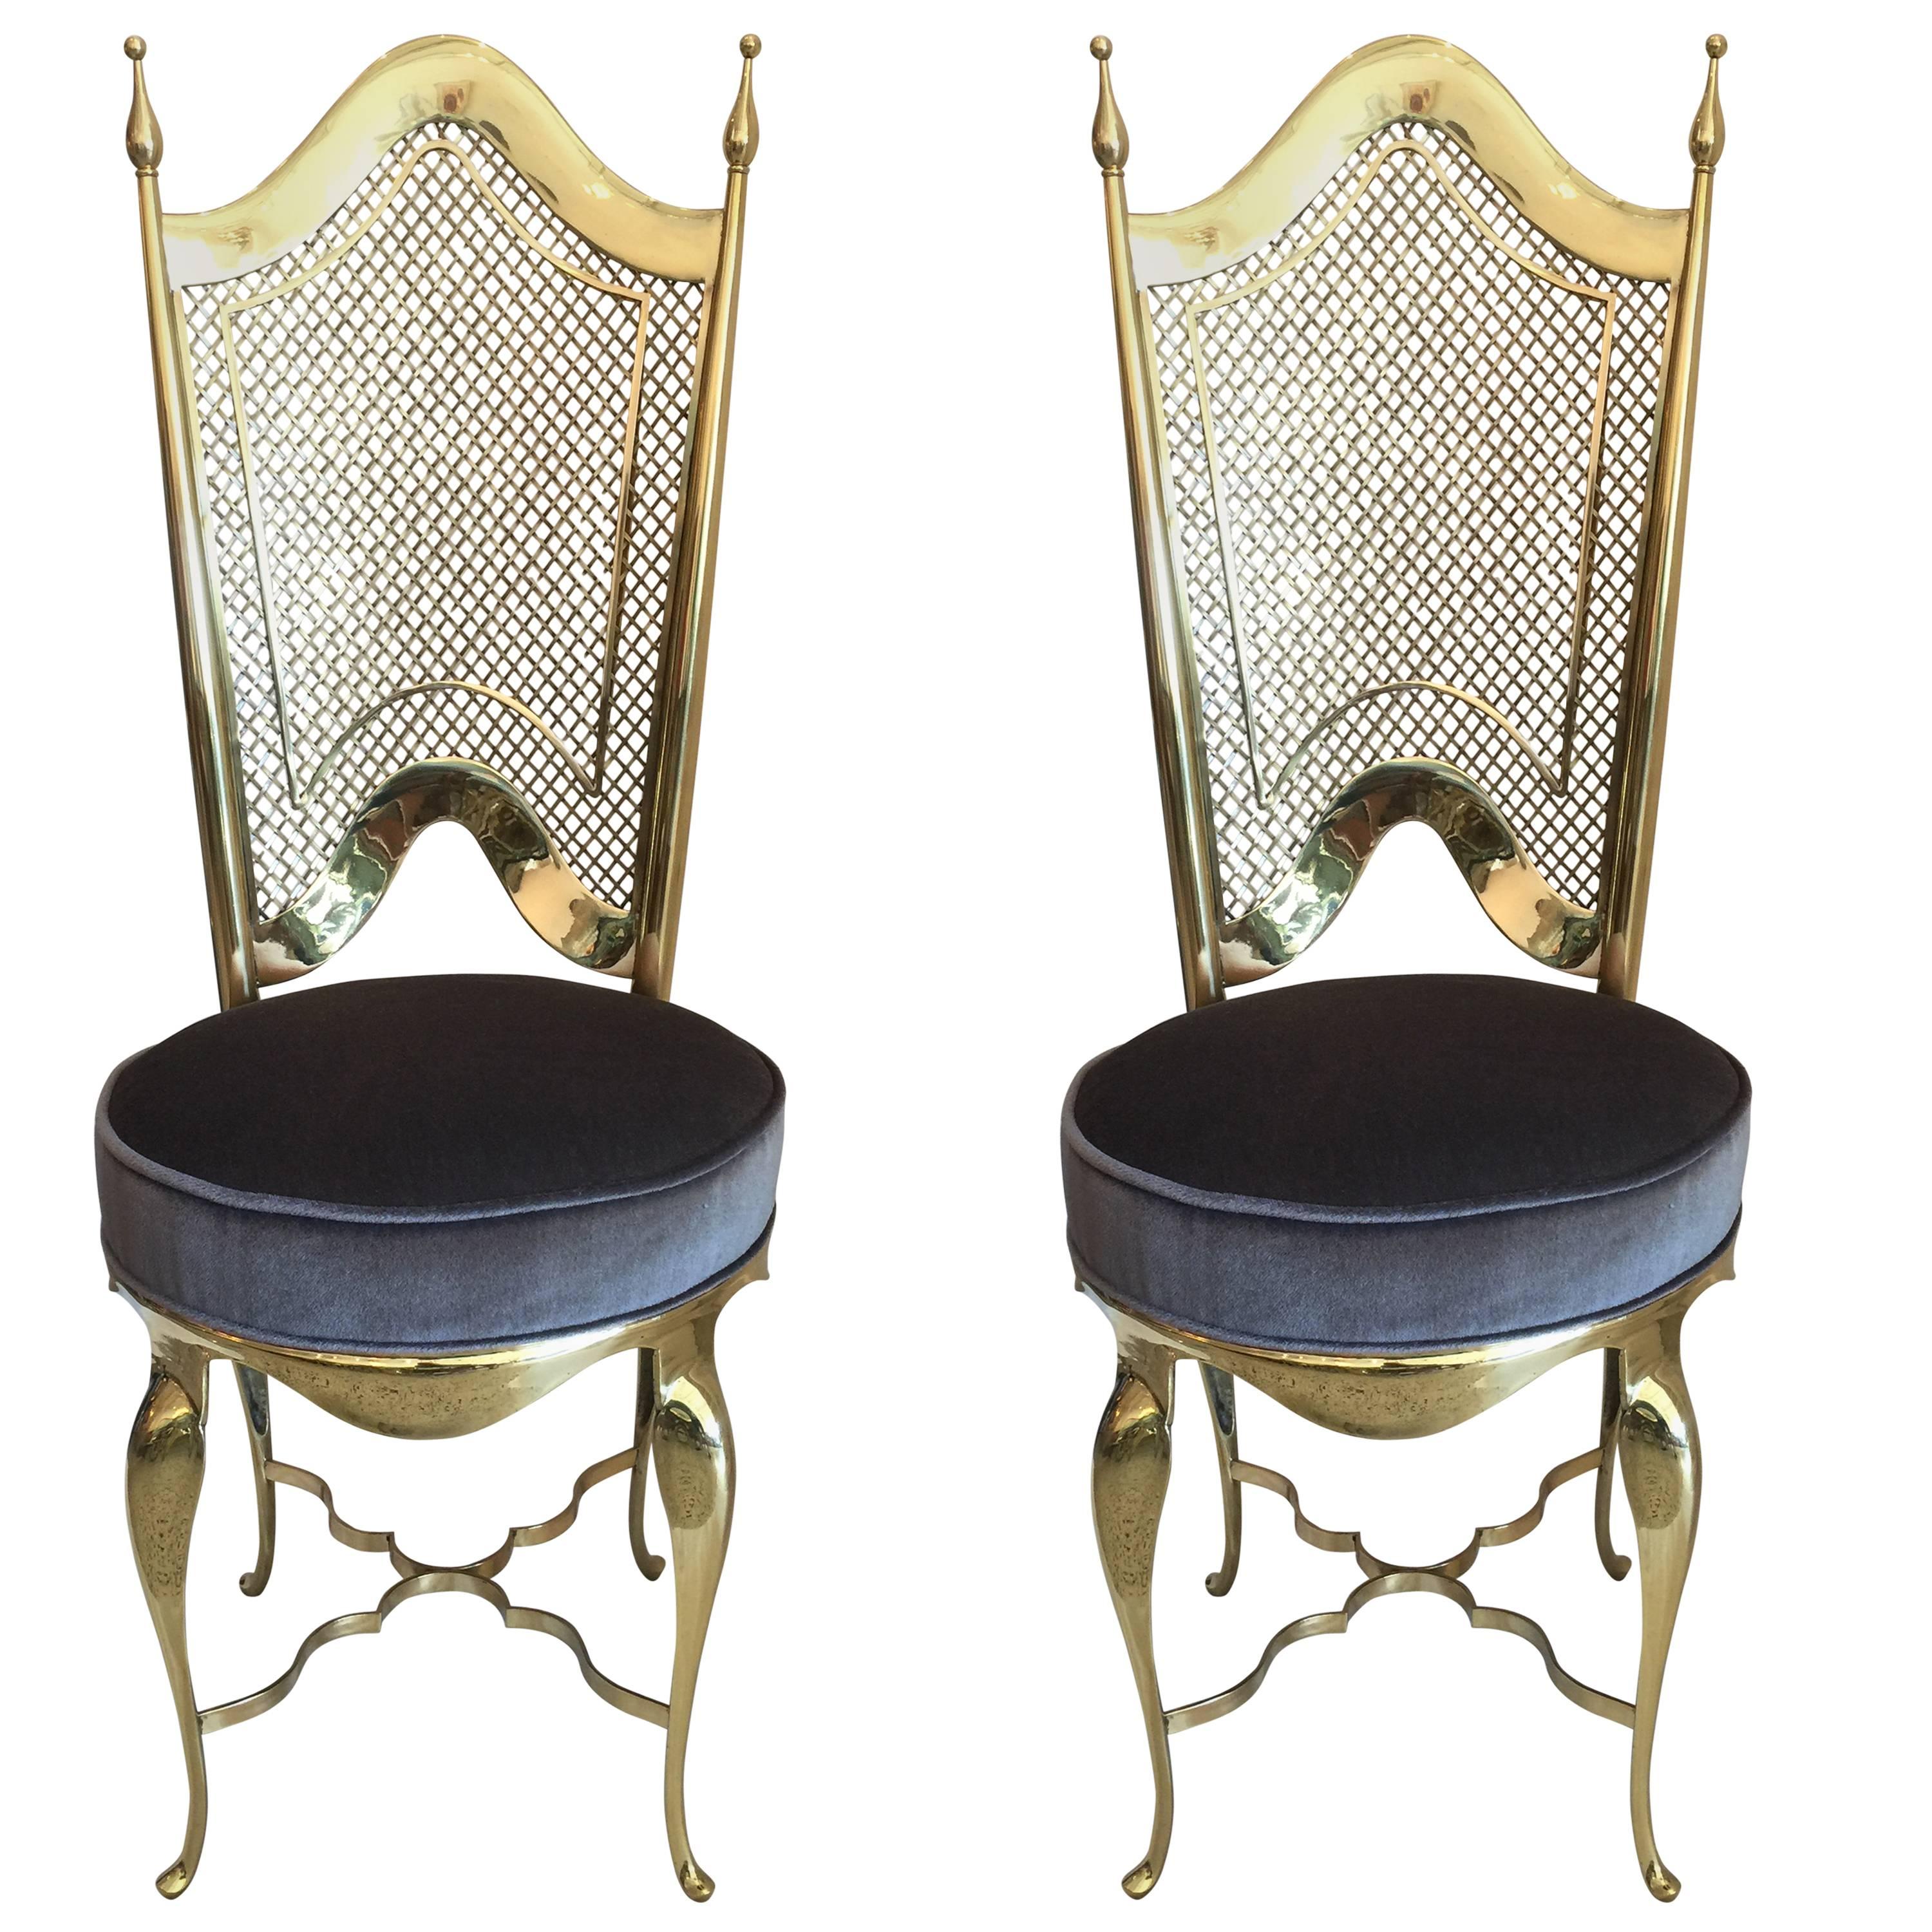 Pair of Polished Brass Italian Side Chairs